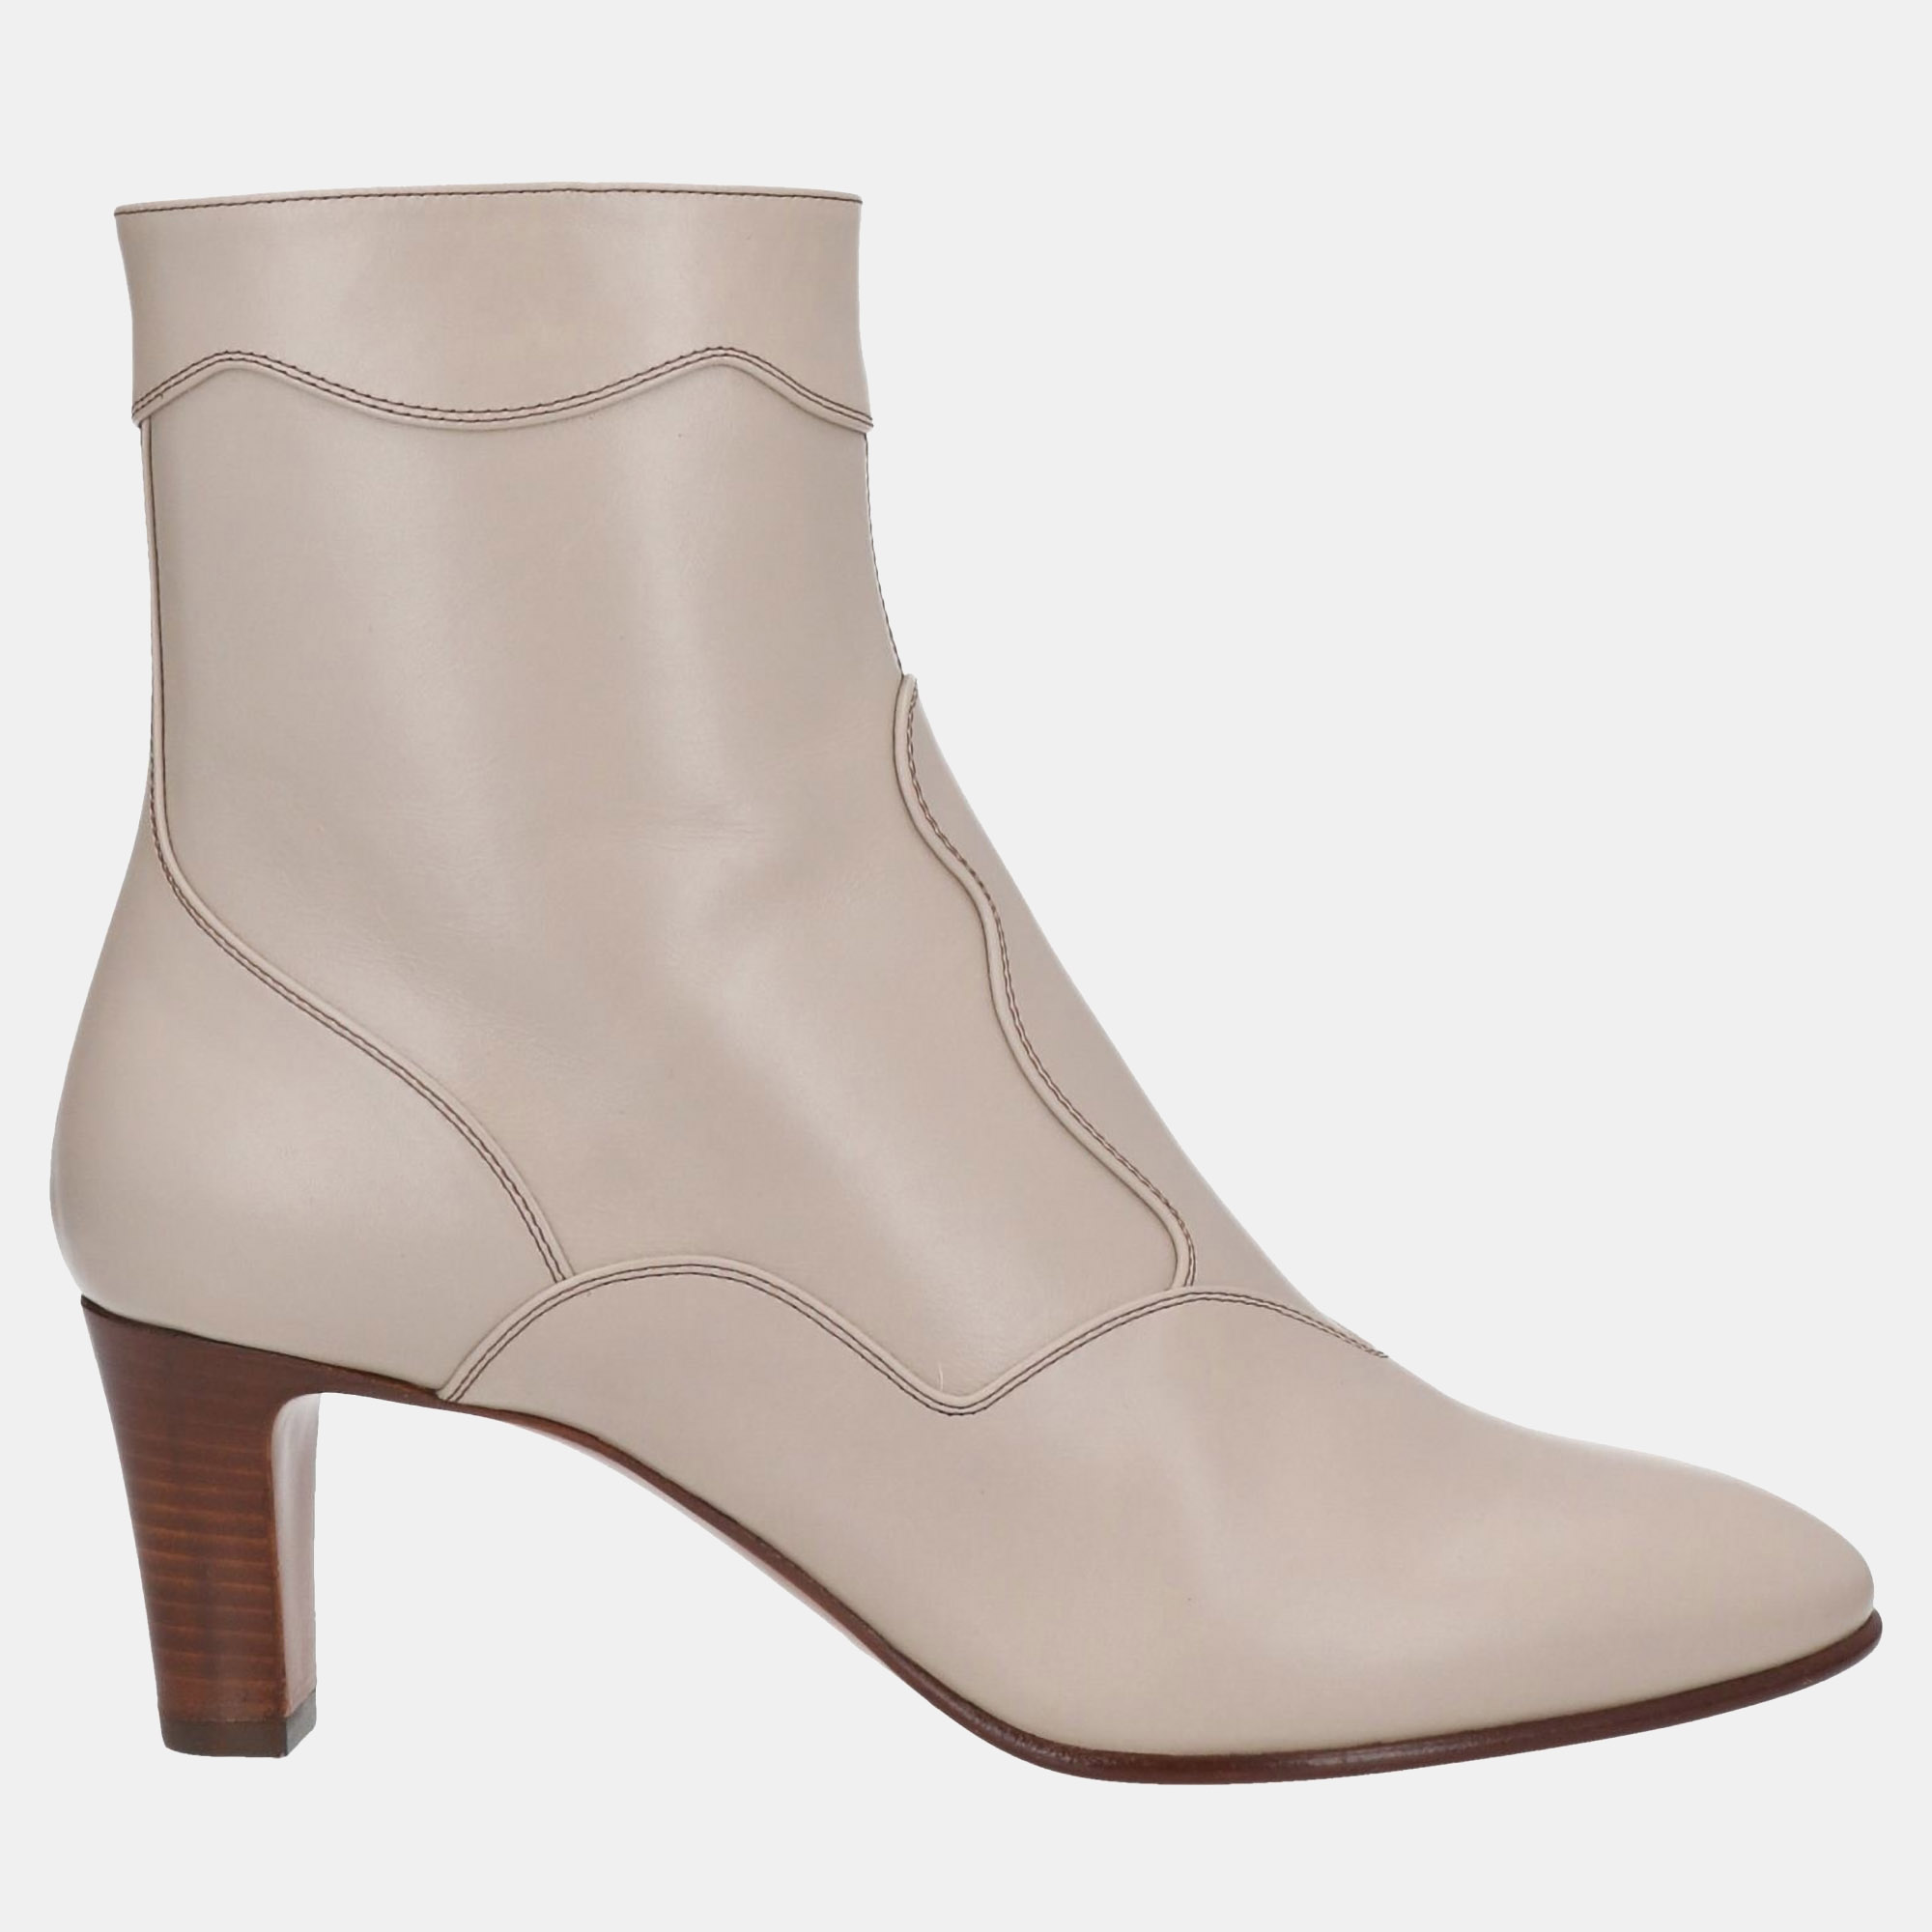 Chloe leather round toe ankle boots 36.5